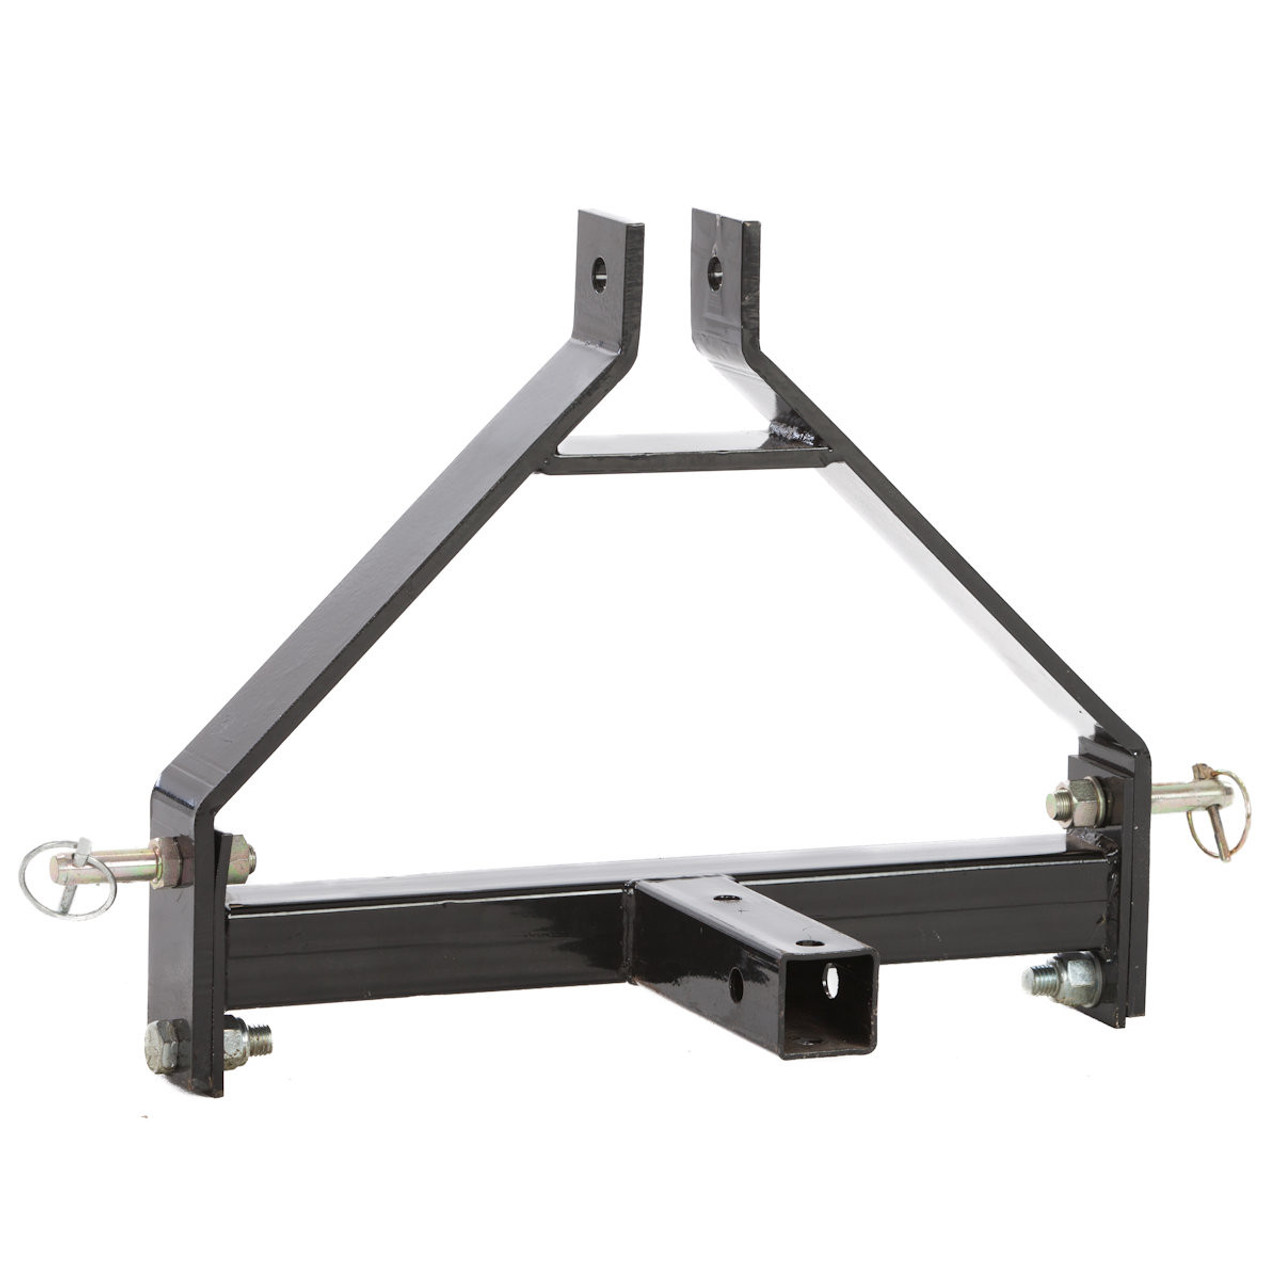 IMPACT Pro 3-Point Hitch Adapter